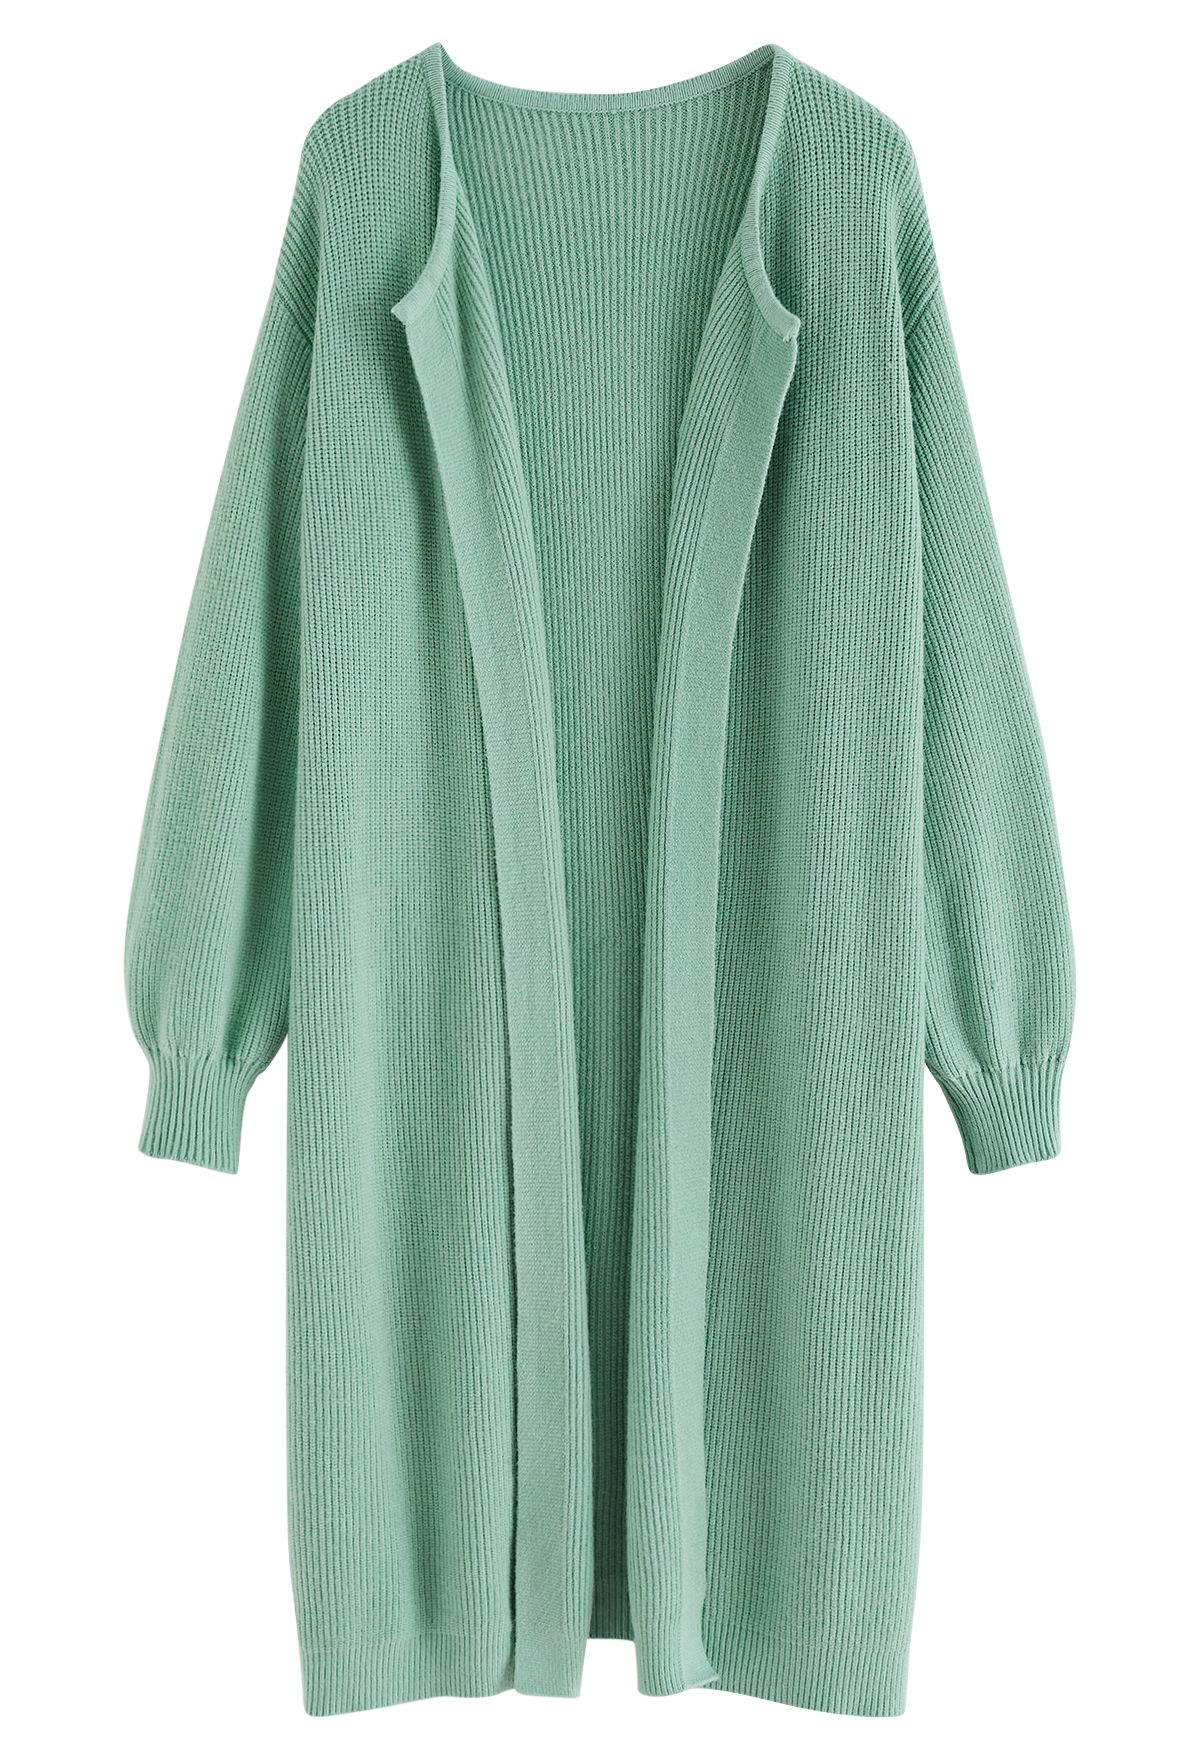 Open Front Longline Knit Cardigan in Turquoise